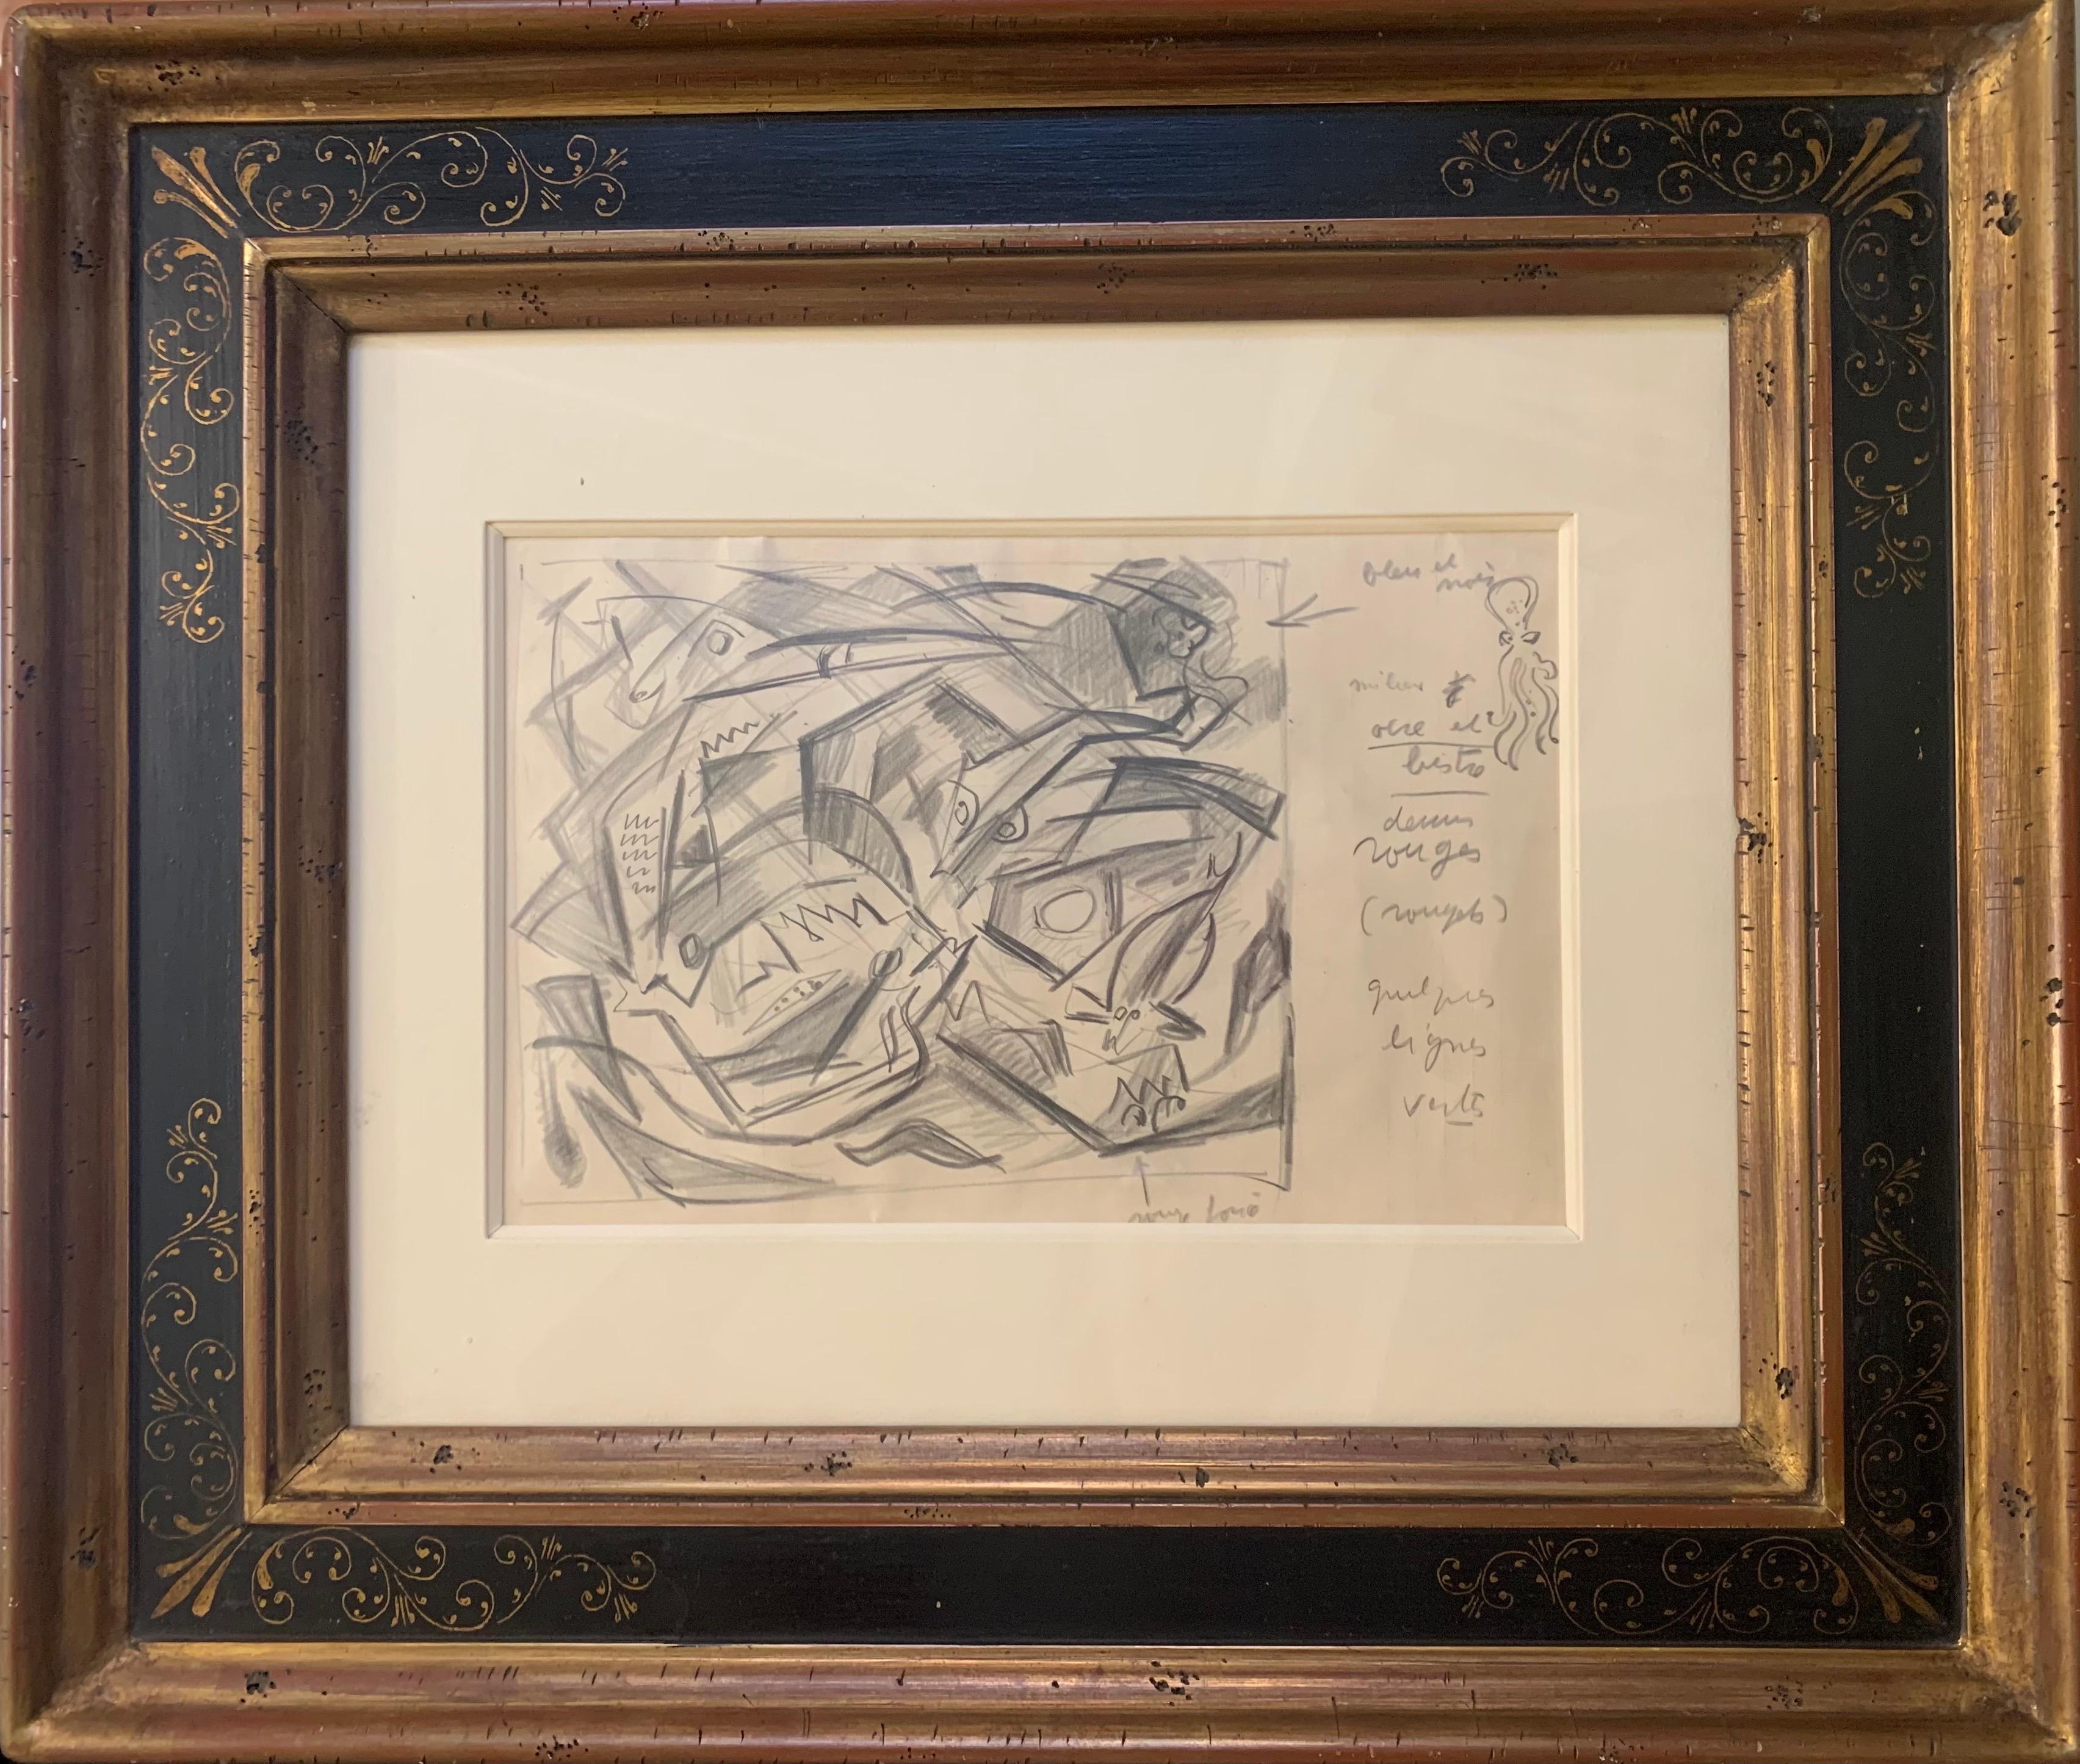 André Masson Abstract Drawing - "Le combat des poissons "Pencil study with annotations , cm. 30 x 20 1940 ca